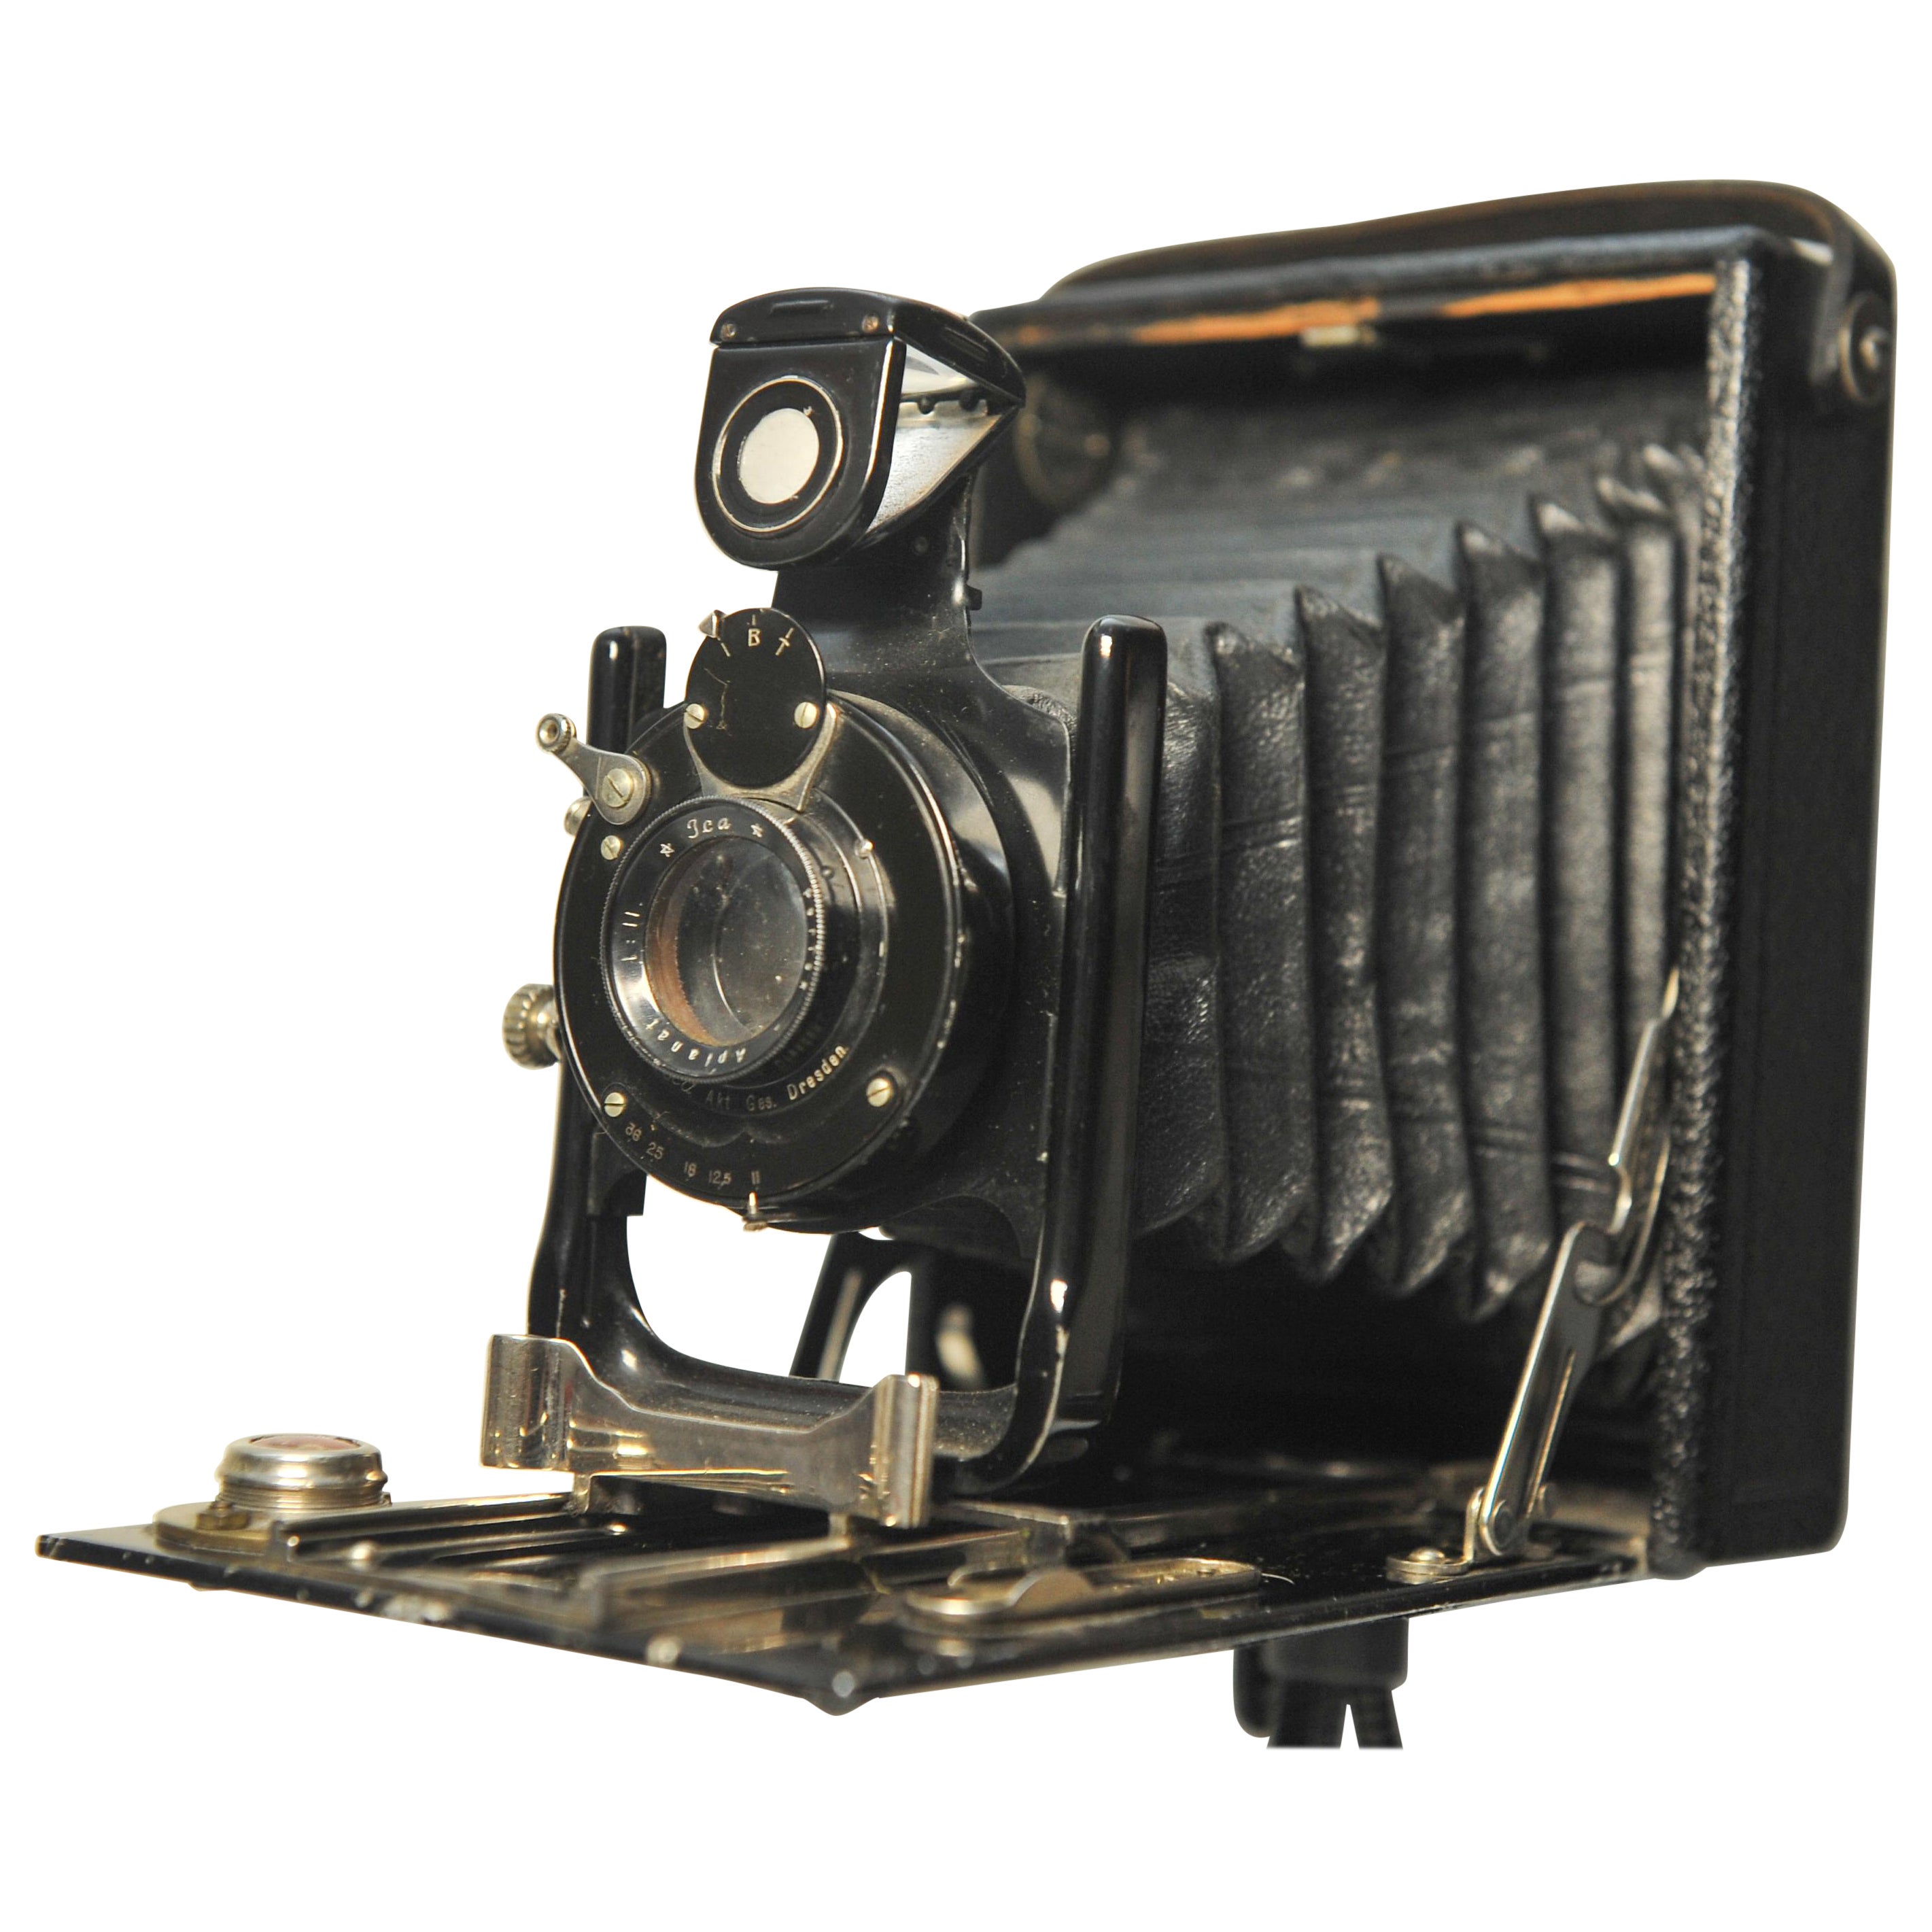 ICA Volta 125 Camera Folding Bed Camera For 9x12cm Plates With Ica Periskop 